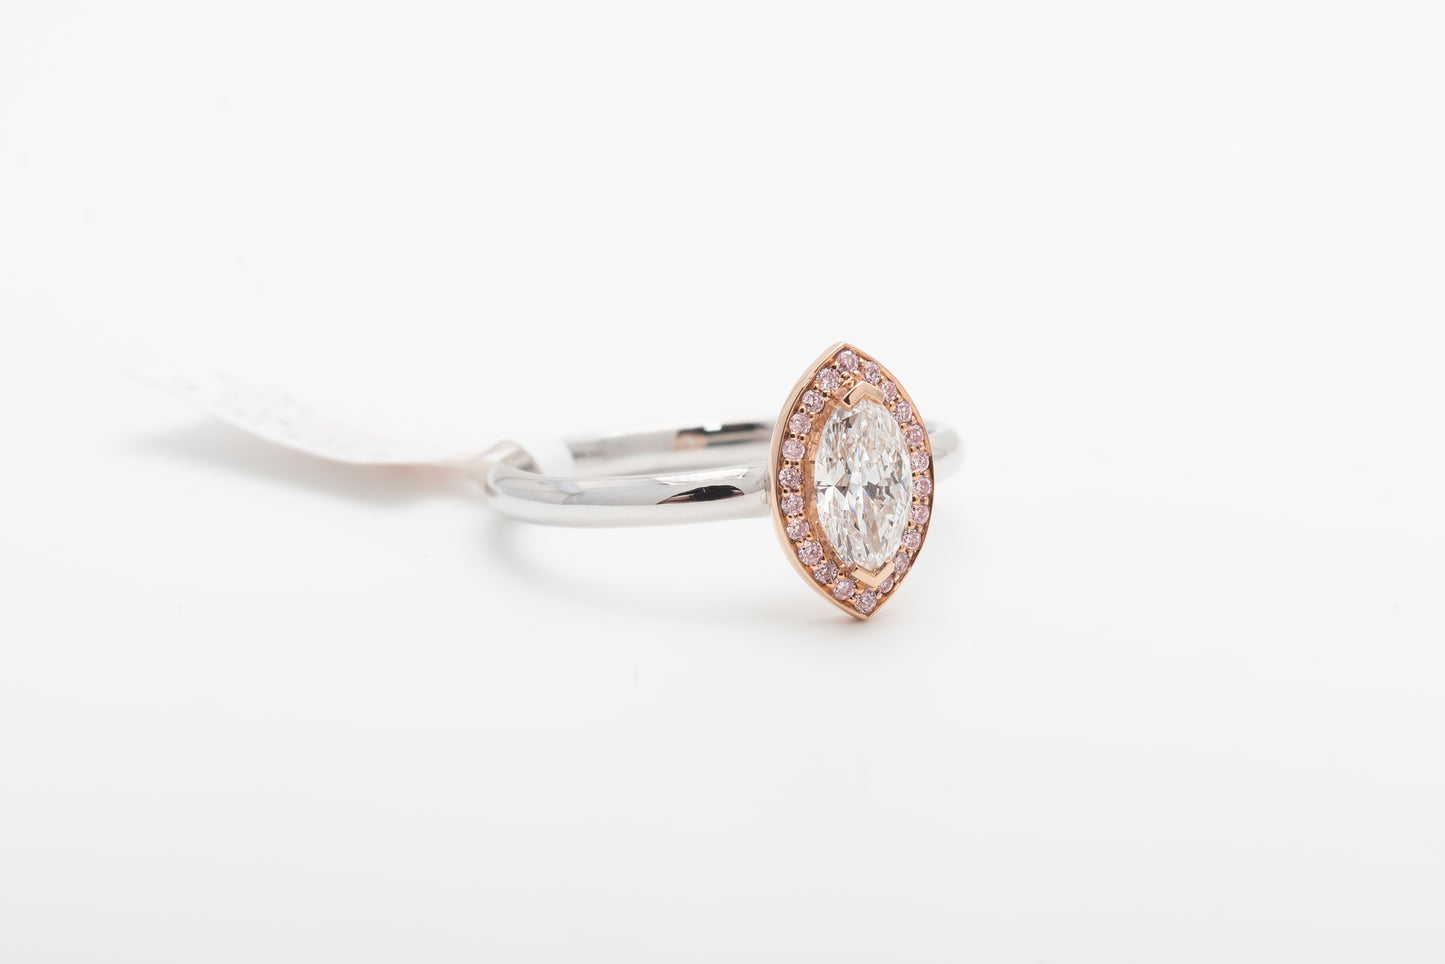 Marquise Diamond Engagement Ring With Argyle Pinks